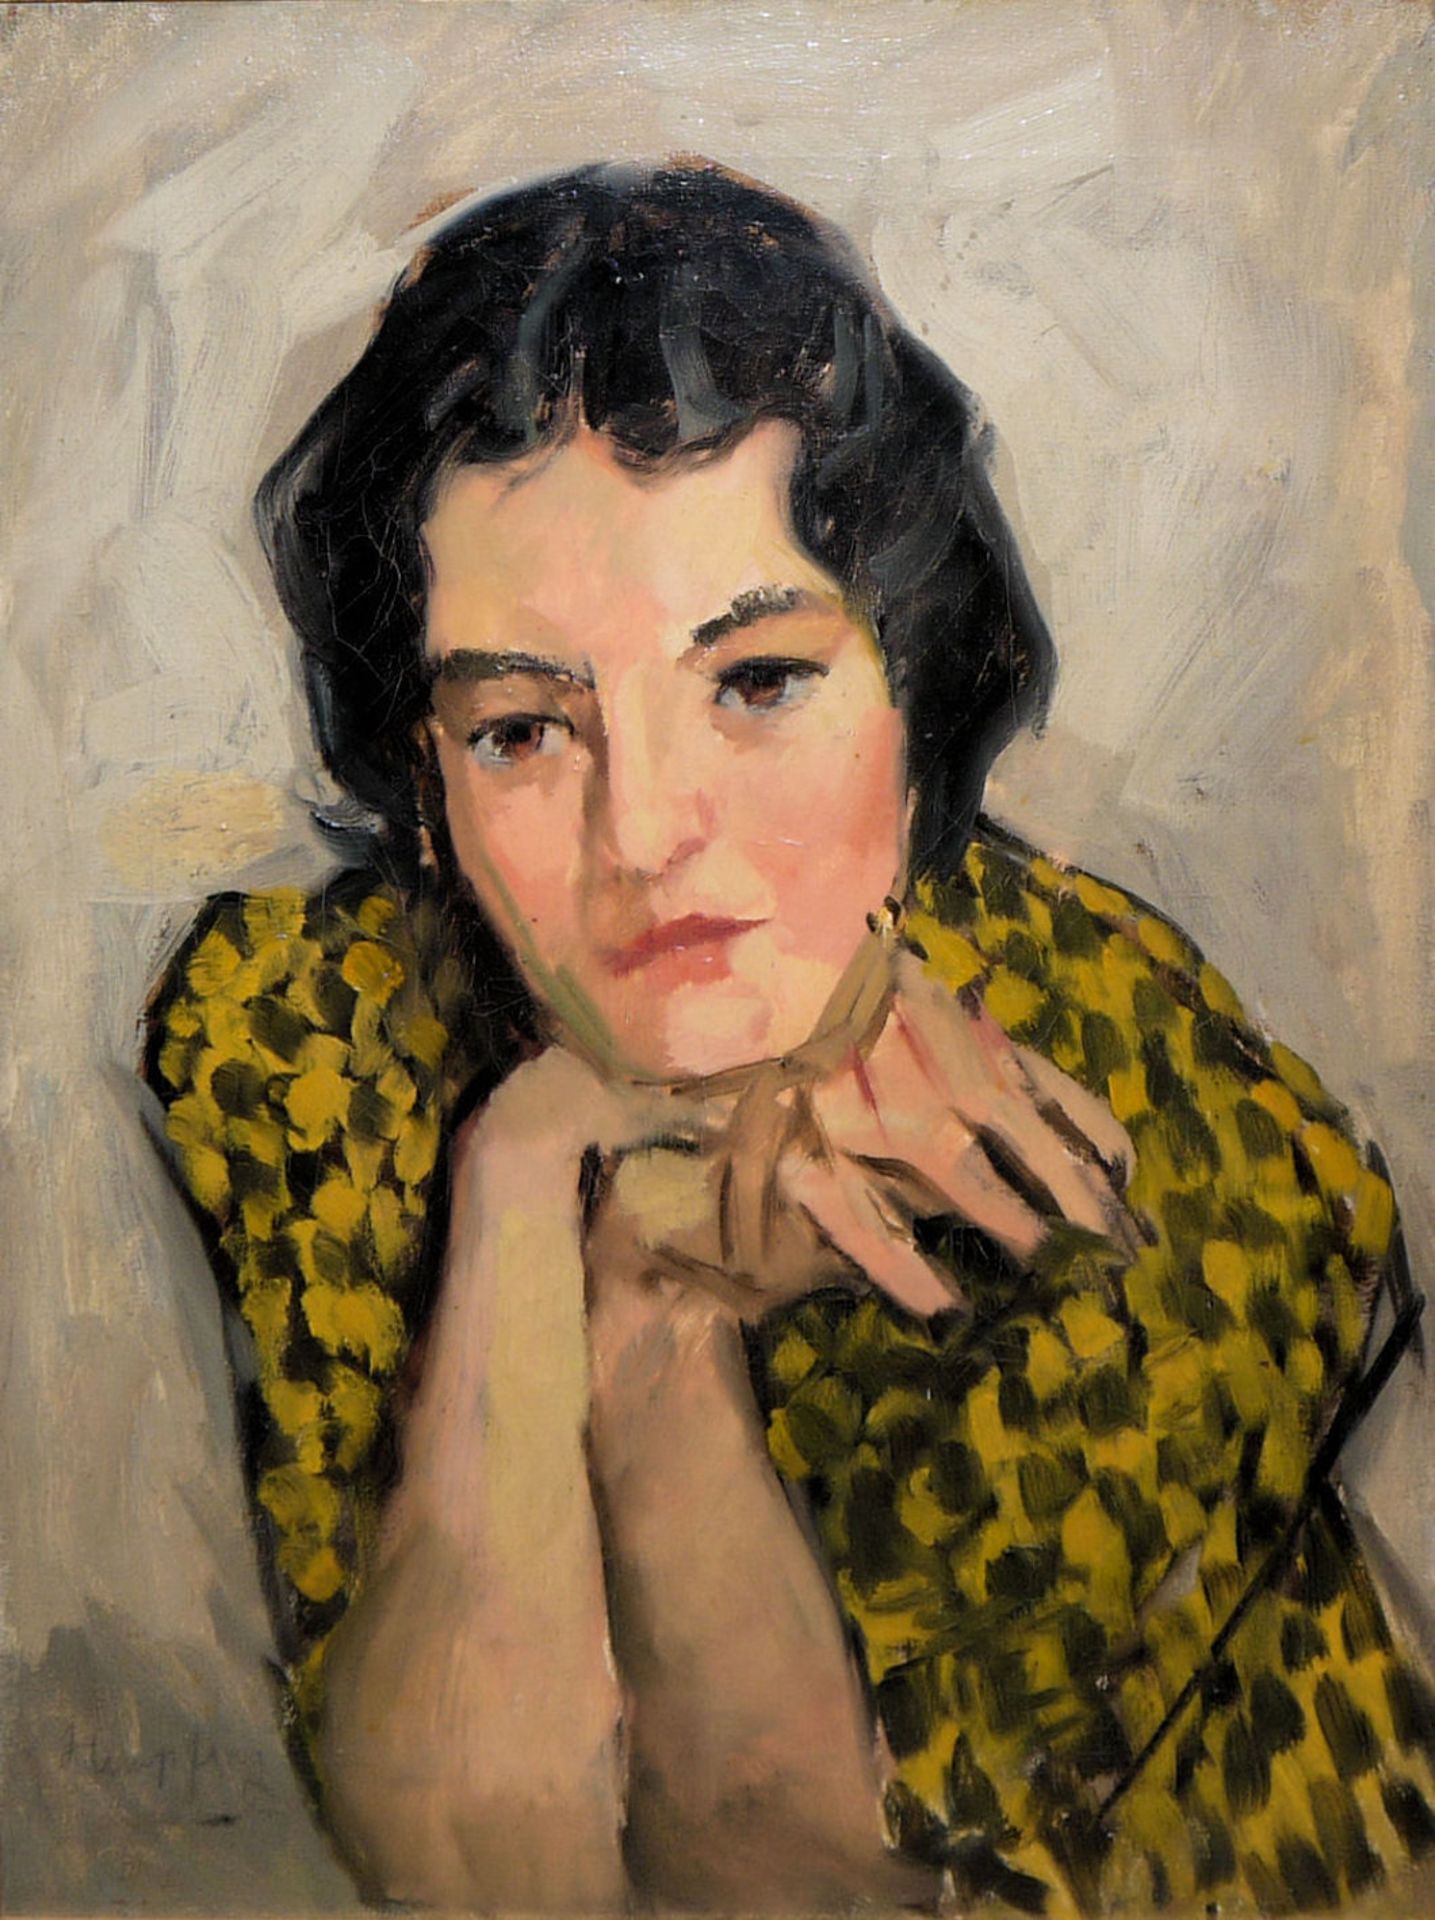 Wilhelm Hempfing, Portrait of a young woman, oil painting 1920s, in a splendid frame - Image 2 of 4